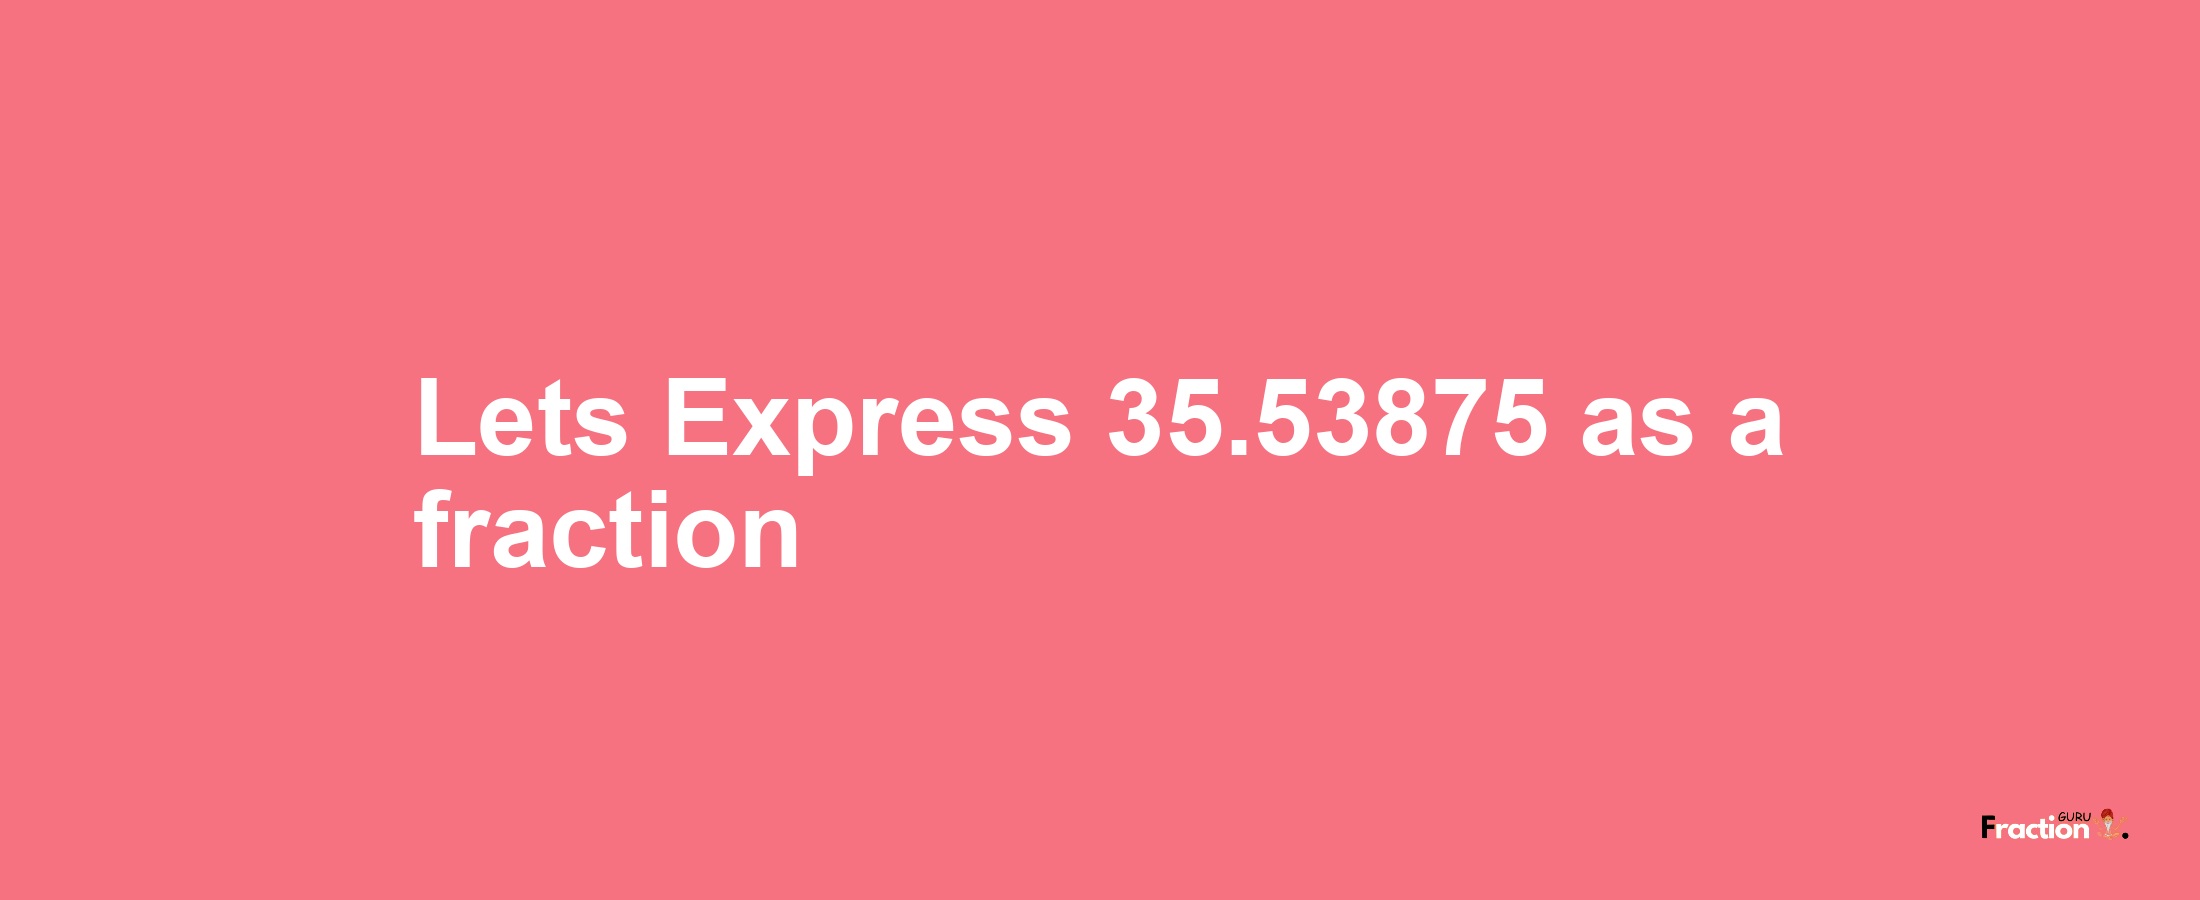 Lets Express 35.53875 as afraction